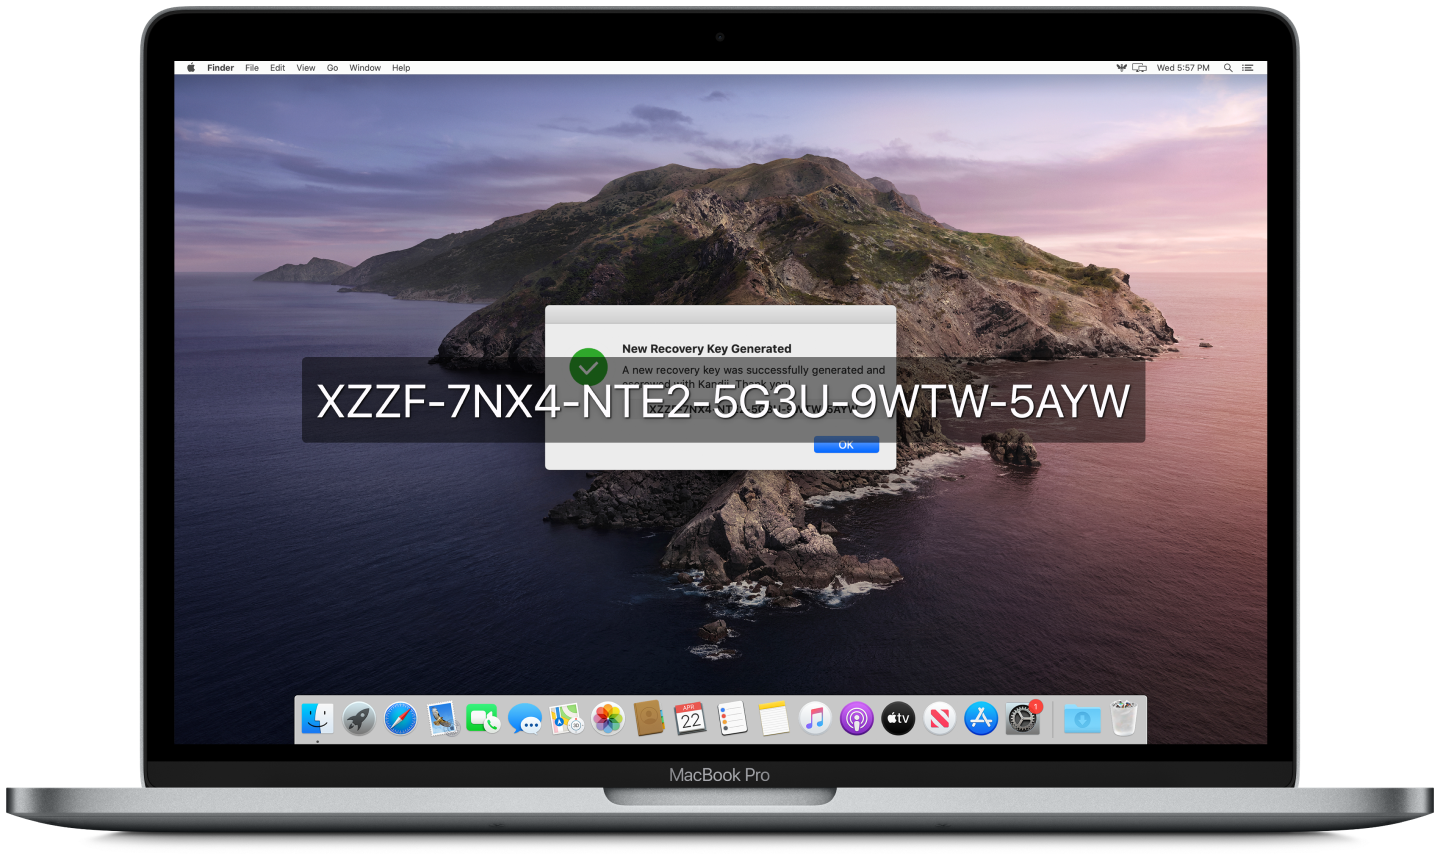 filevault 2 key accessibility